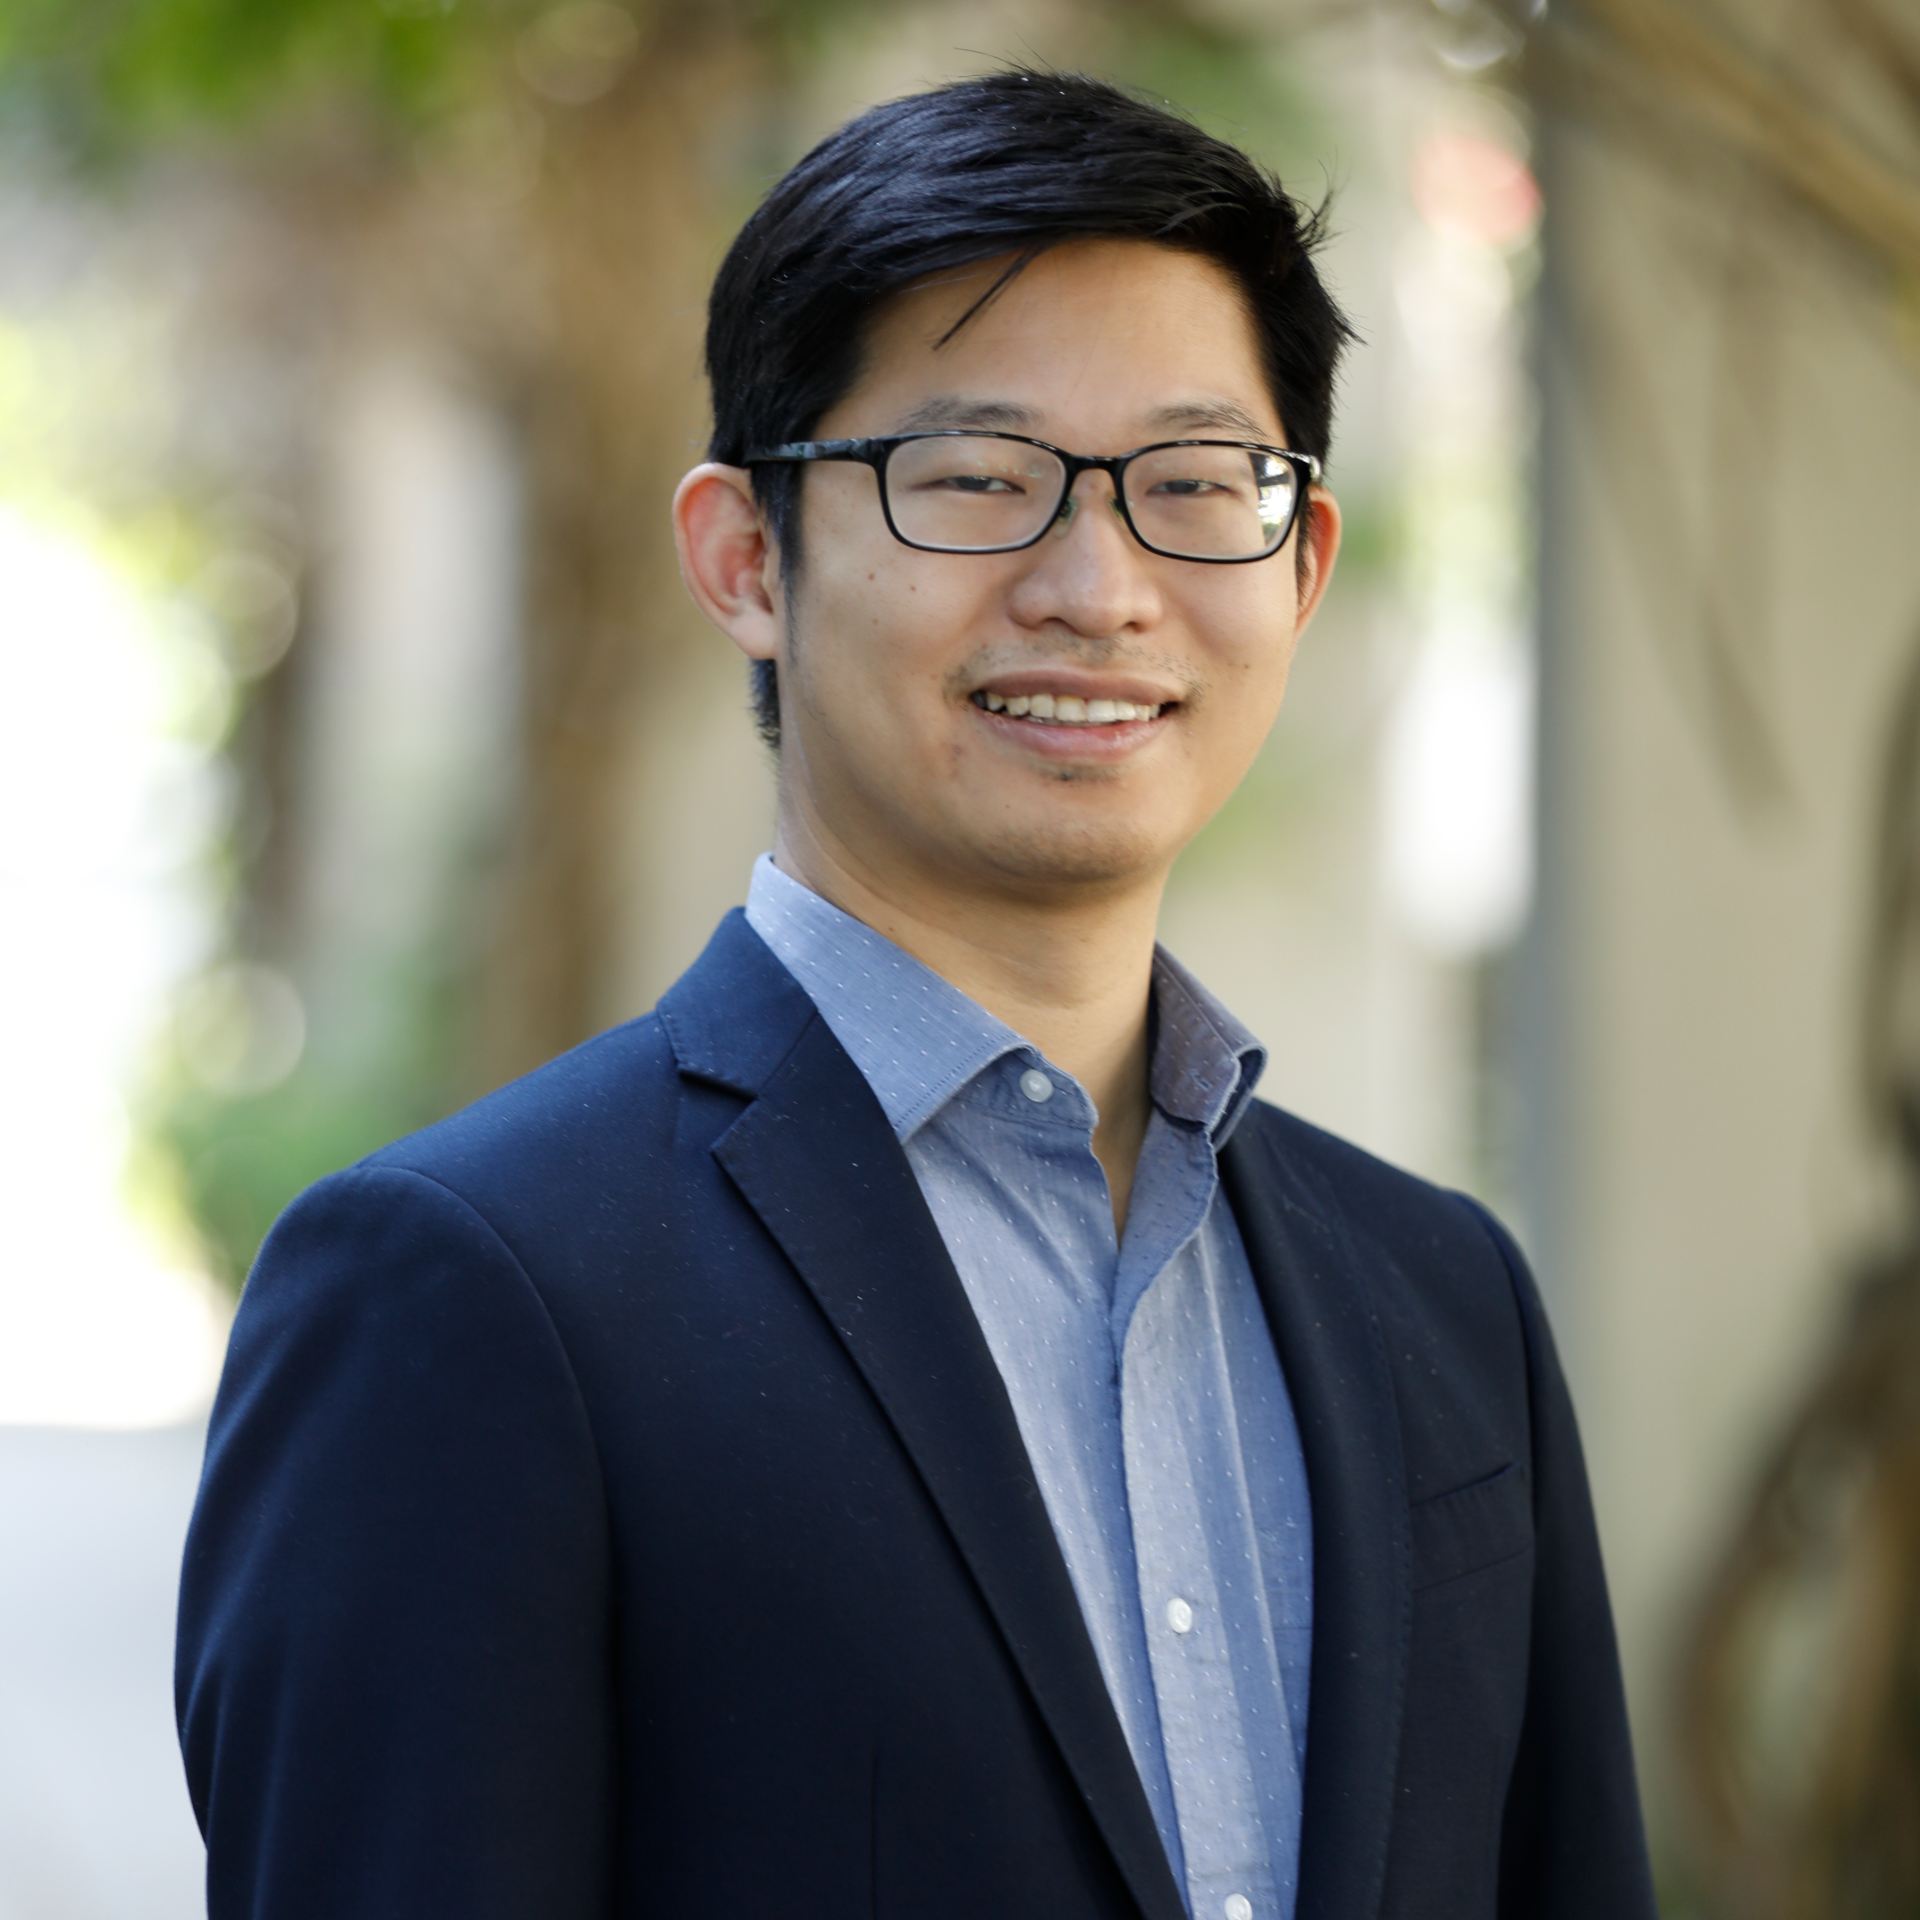 Dr. Daniel Chow appointed to the Vice Chair of Innovation and Entrepreneurship